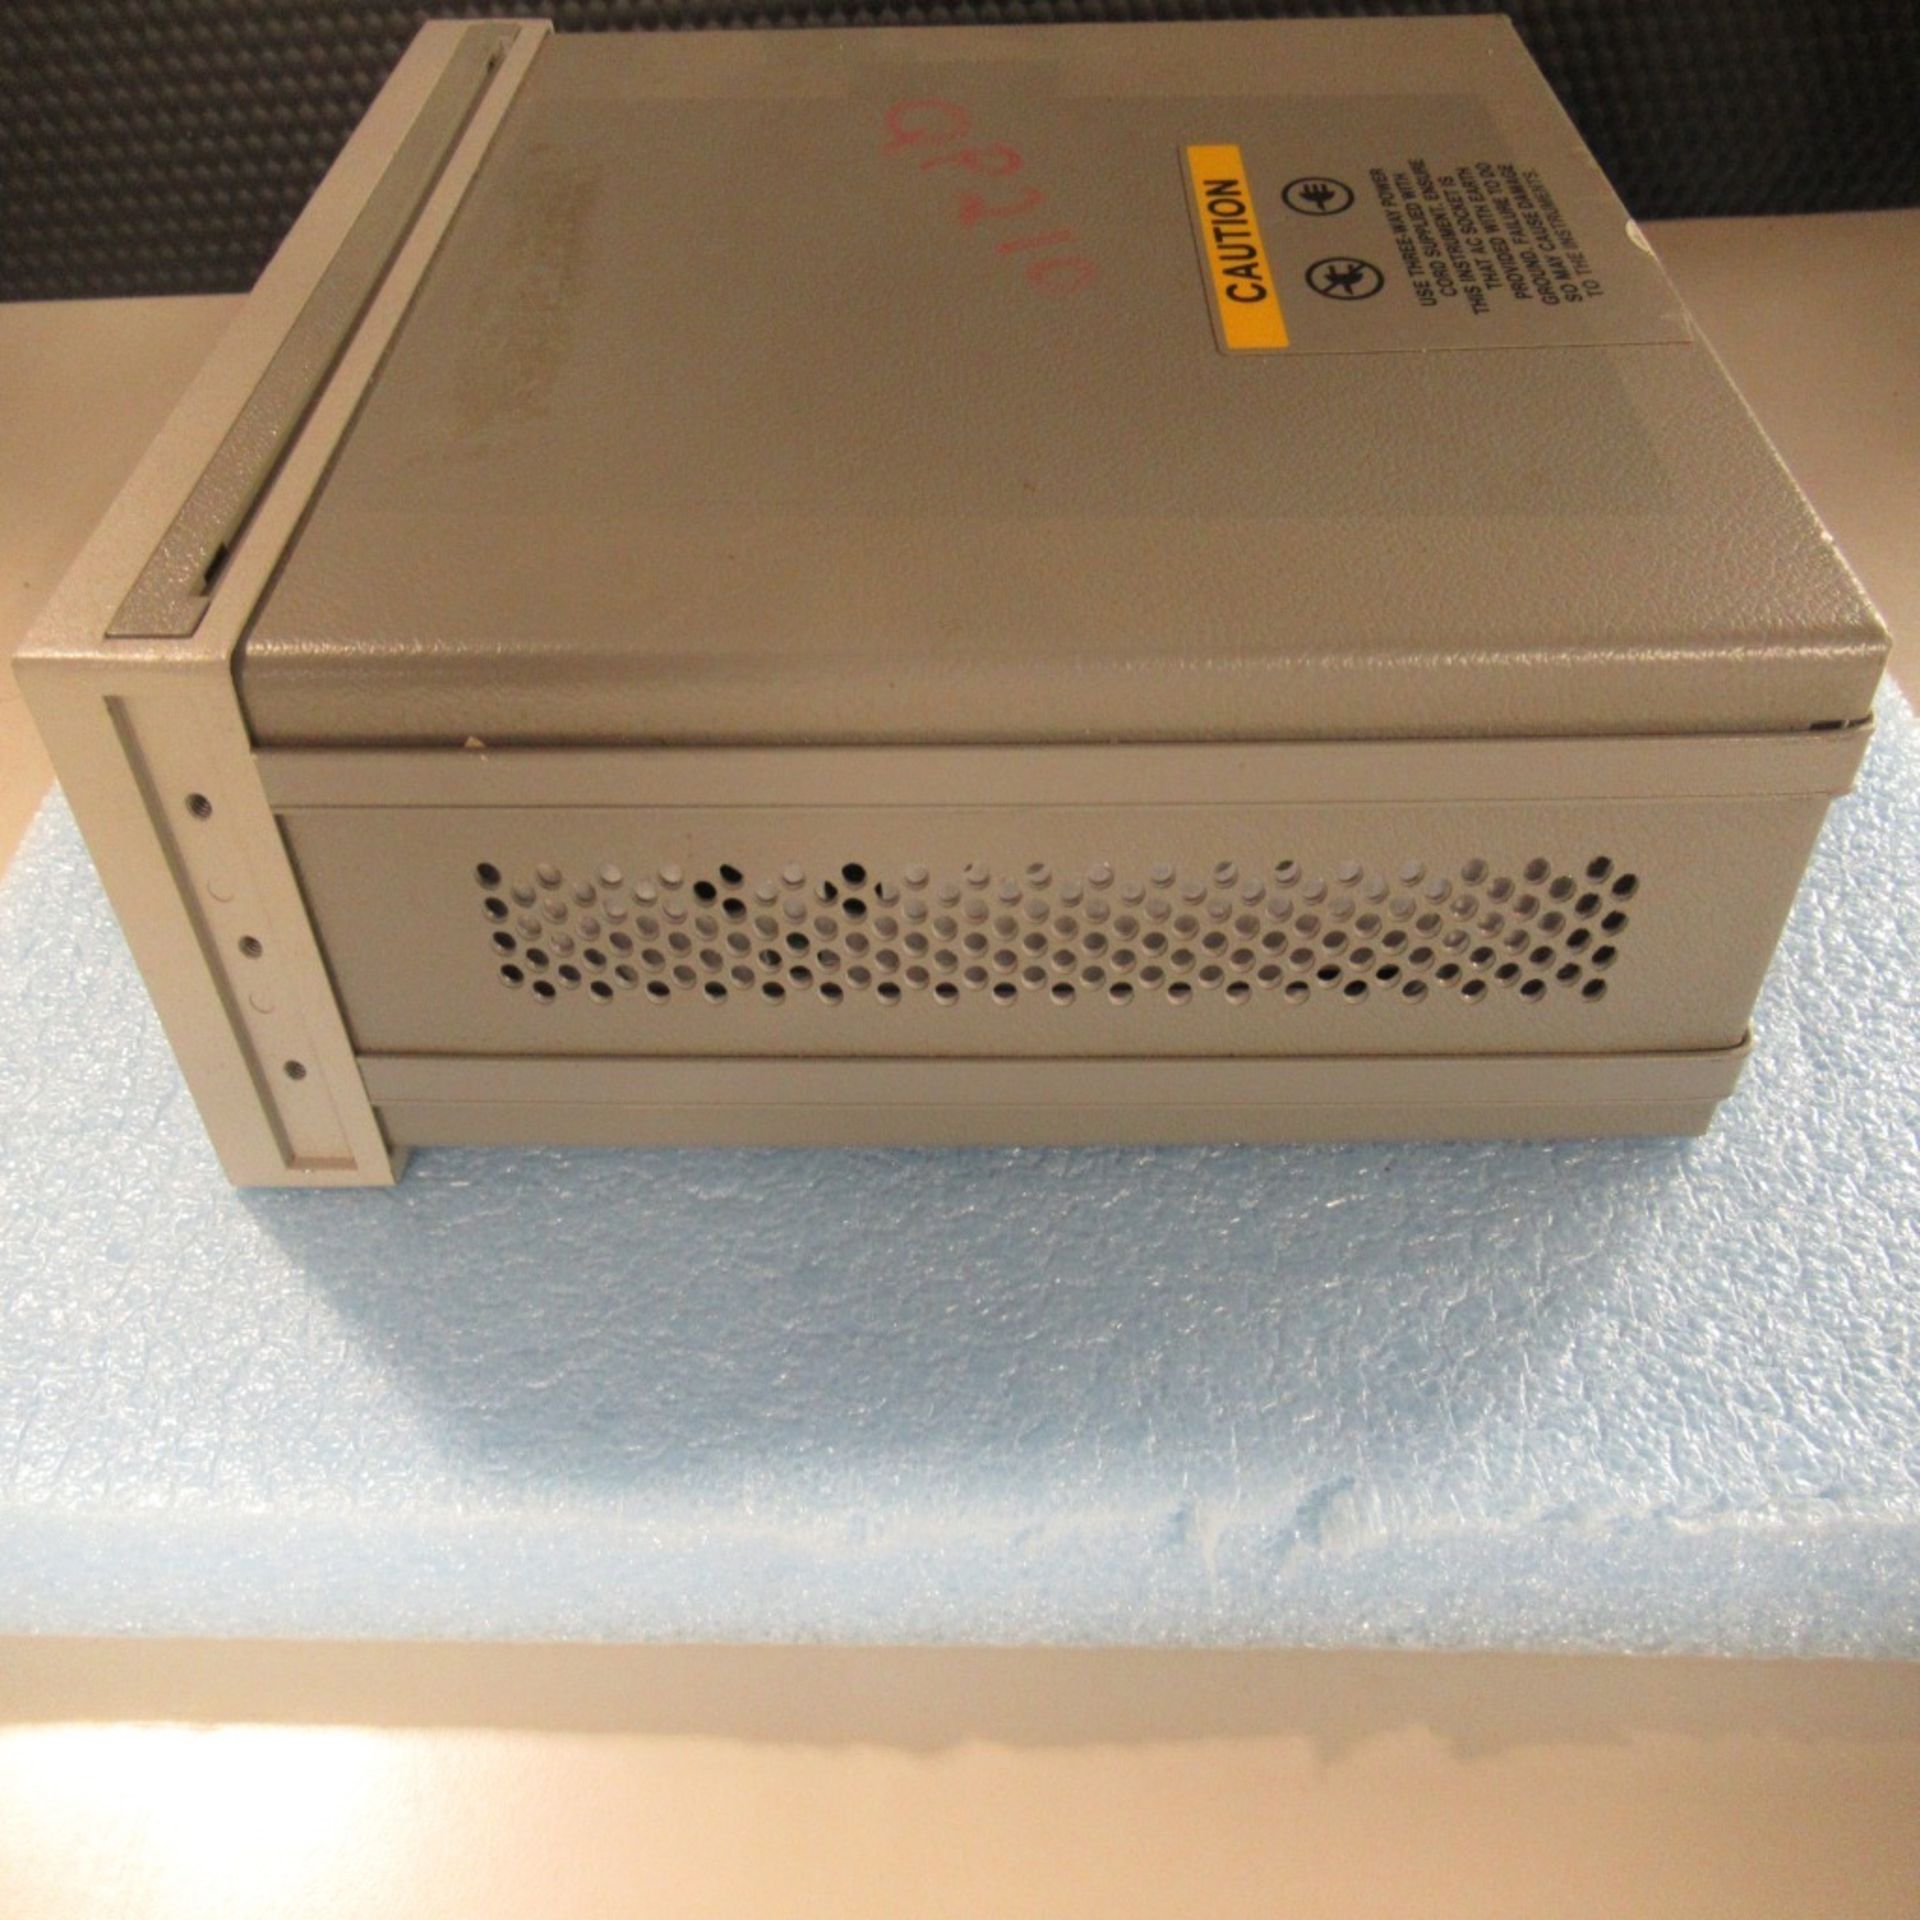 PHOTON SNAP SHOT MODEL 6000 *POWERS ON* NO SCREEN DISPLAY; FARNELL AP20-80 REGULATED POWER SUPPLY * - Image 188 of 222